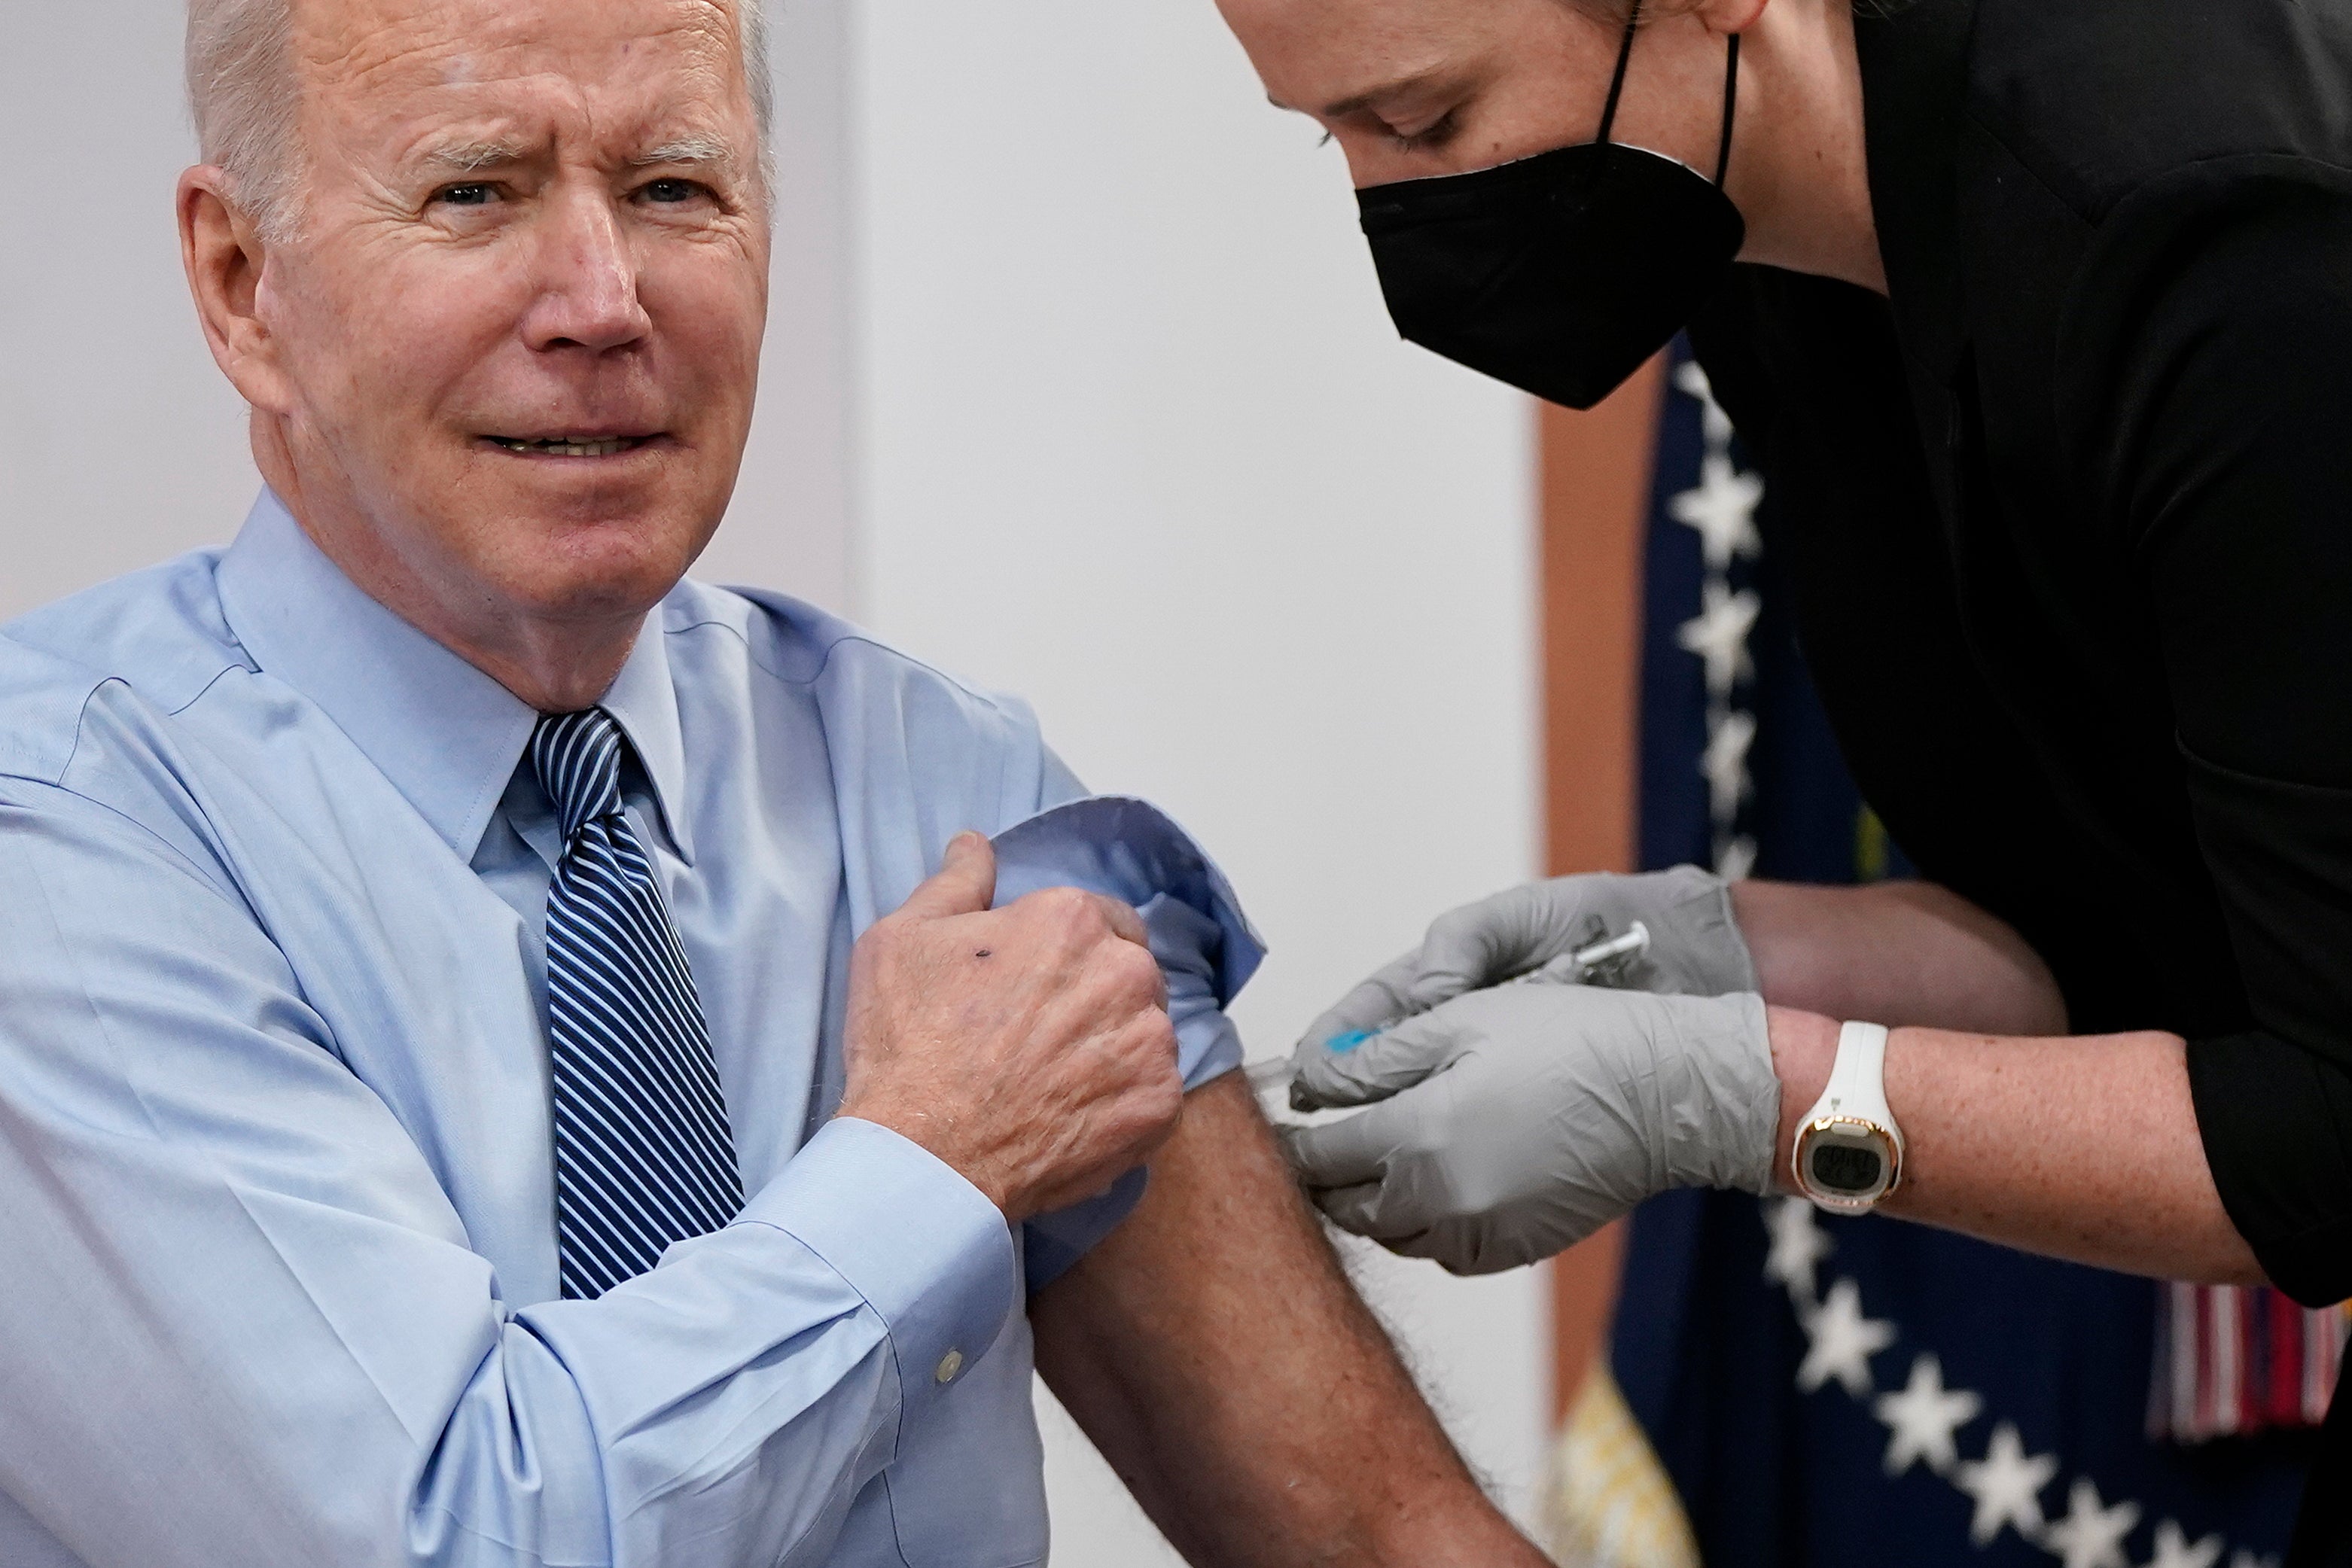 Critics argue the Biden administration could do more to fight Covid than its approach, which has largely revolved around promoting the vaccine